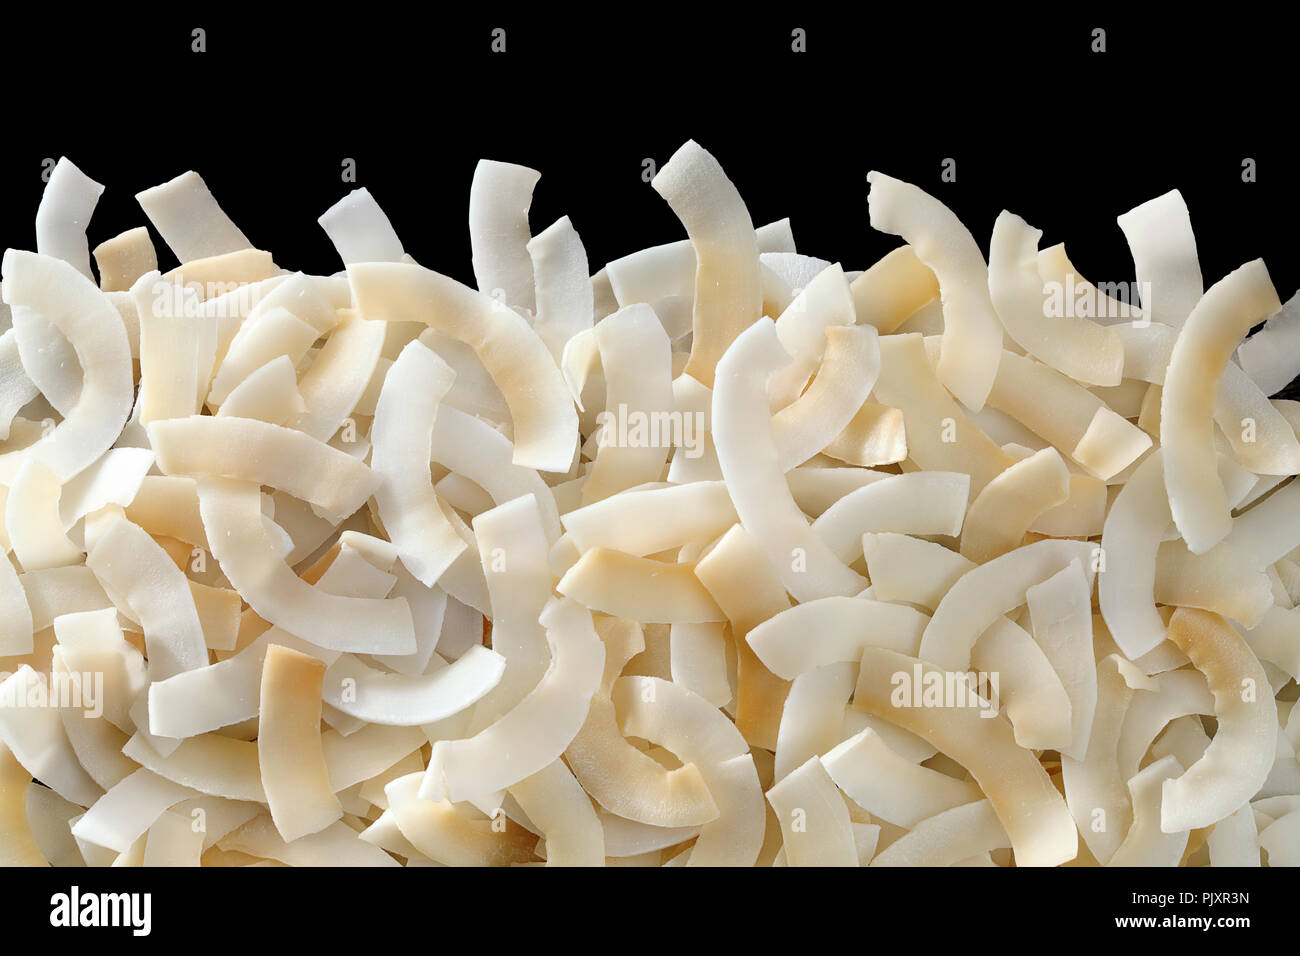 Roasted baked toasted Natural Thin Sliced Coconut Chips Background Stock Photo